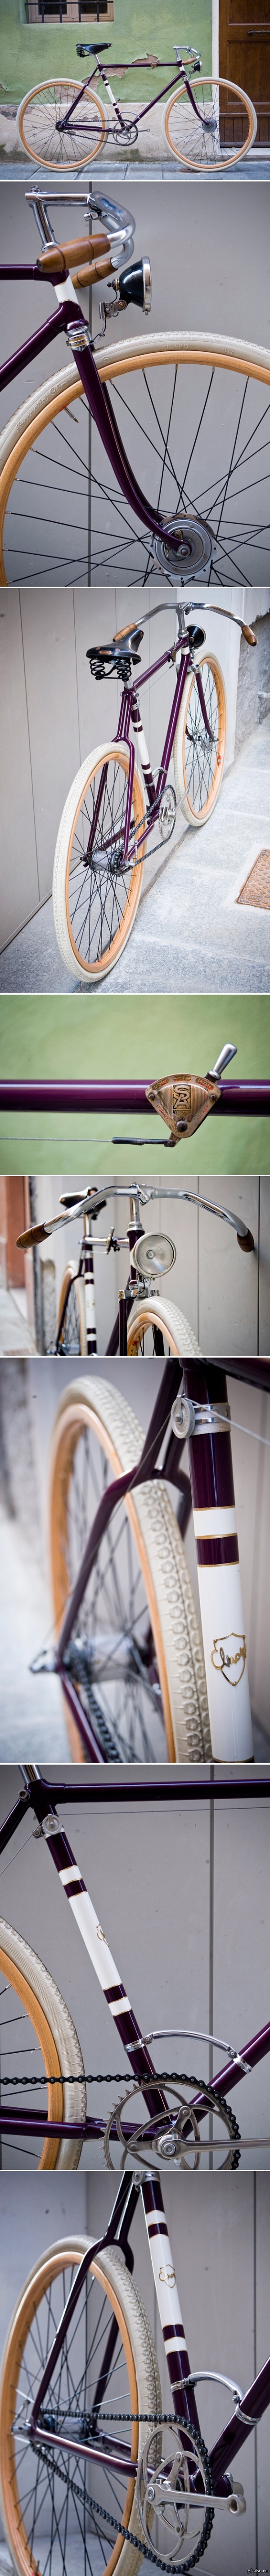 Velo Design #2 Chiossi Cycles Miano from the 1940s